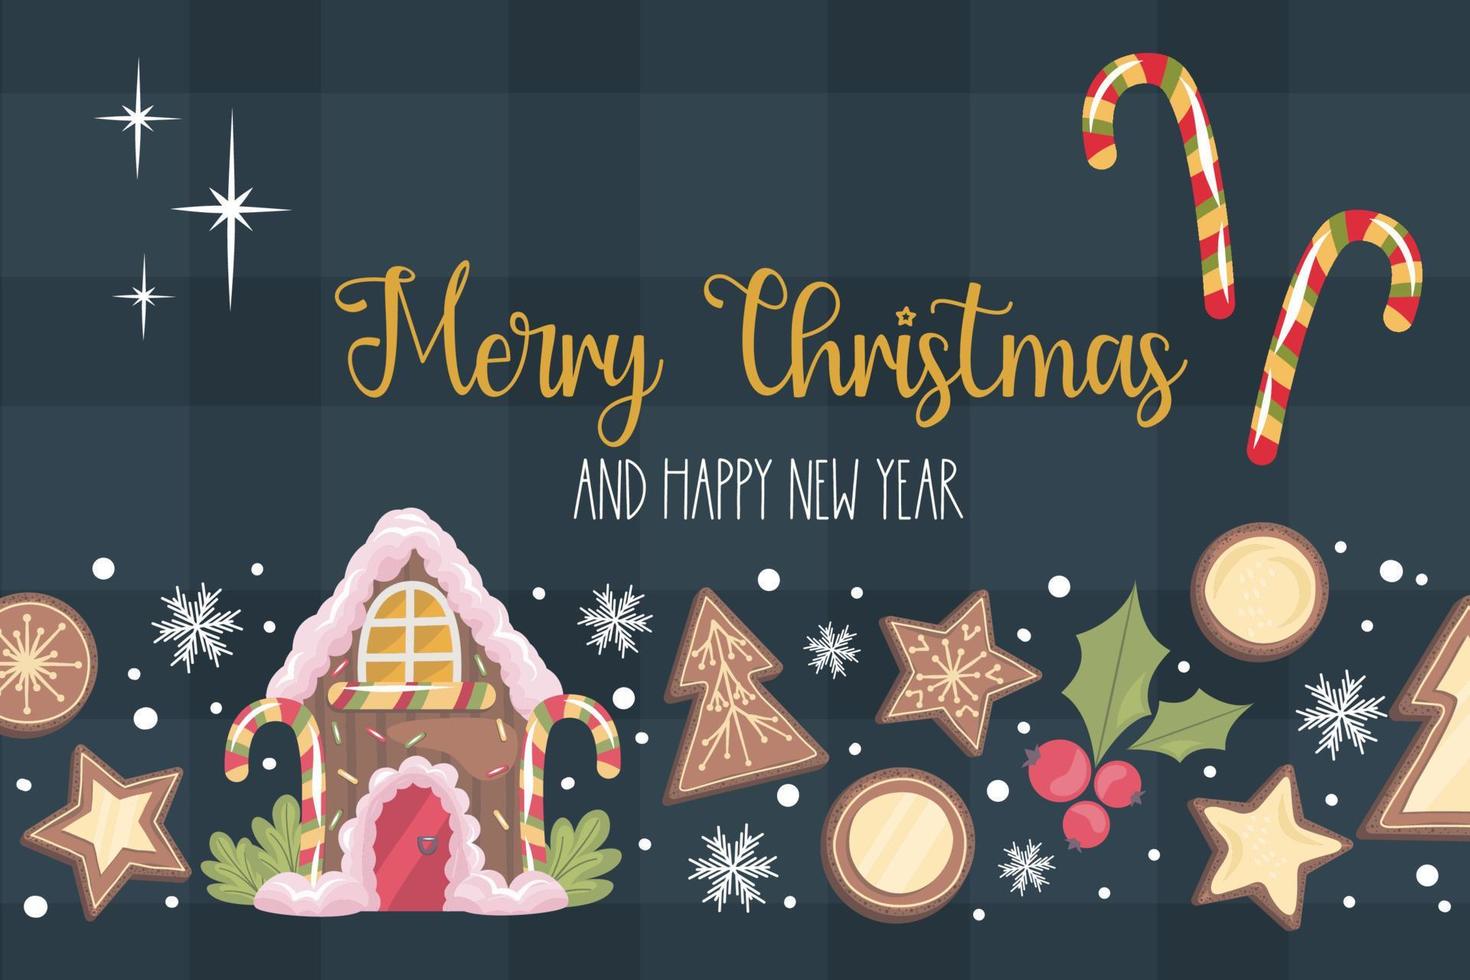 Christmas banner design with text merry christmas, gingerbread house. Gingerbread cookie, cocoa with marshmallow and lollipop for holiday decorations. Vector illustration